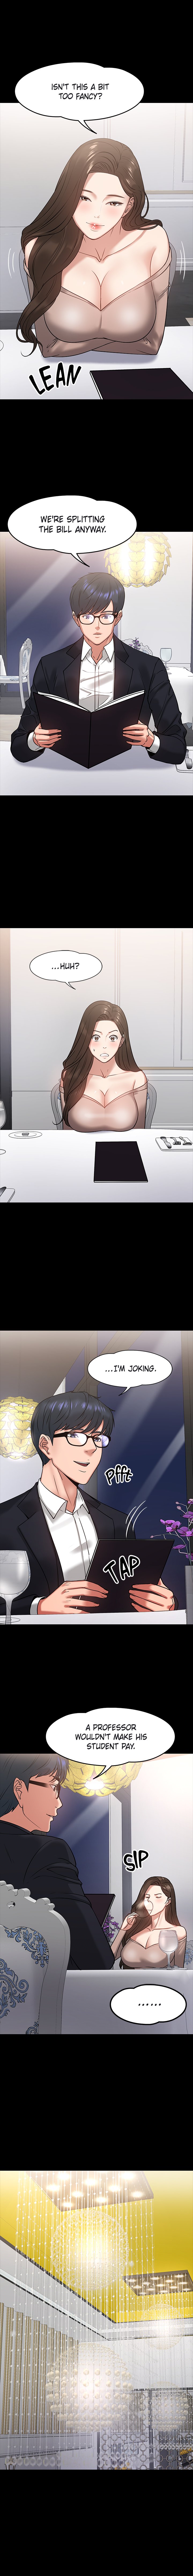 Are You Just Going To Watch? Chapter 16 - Page 6